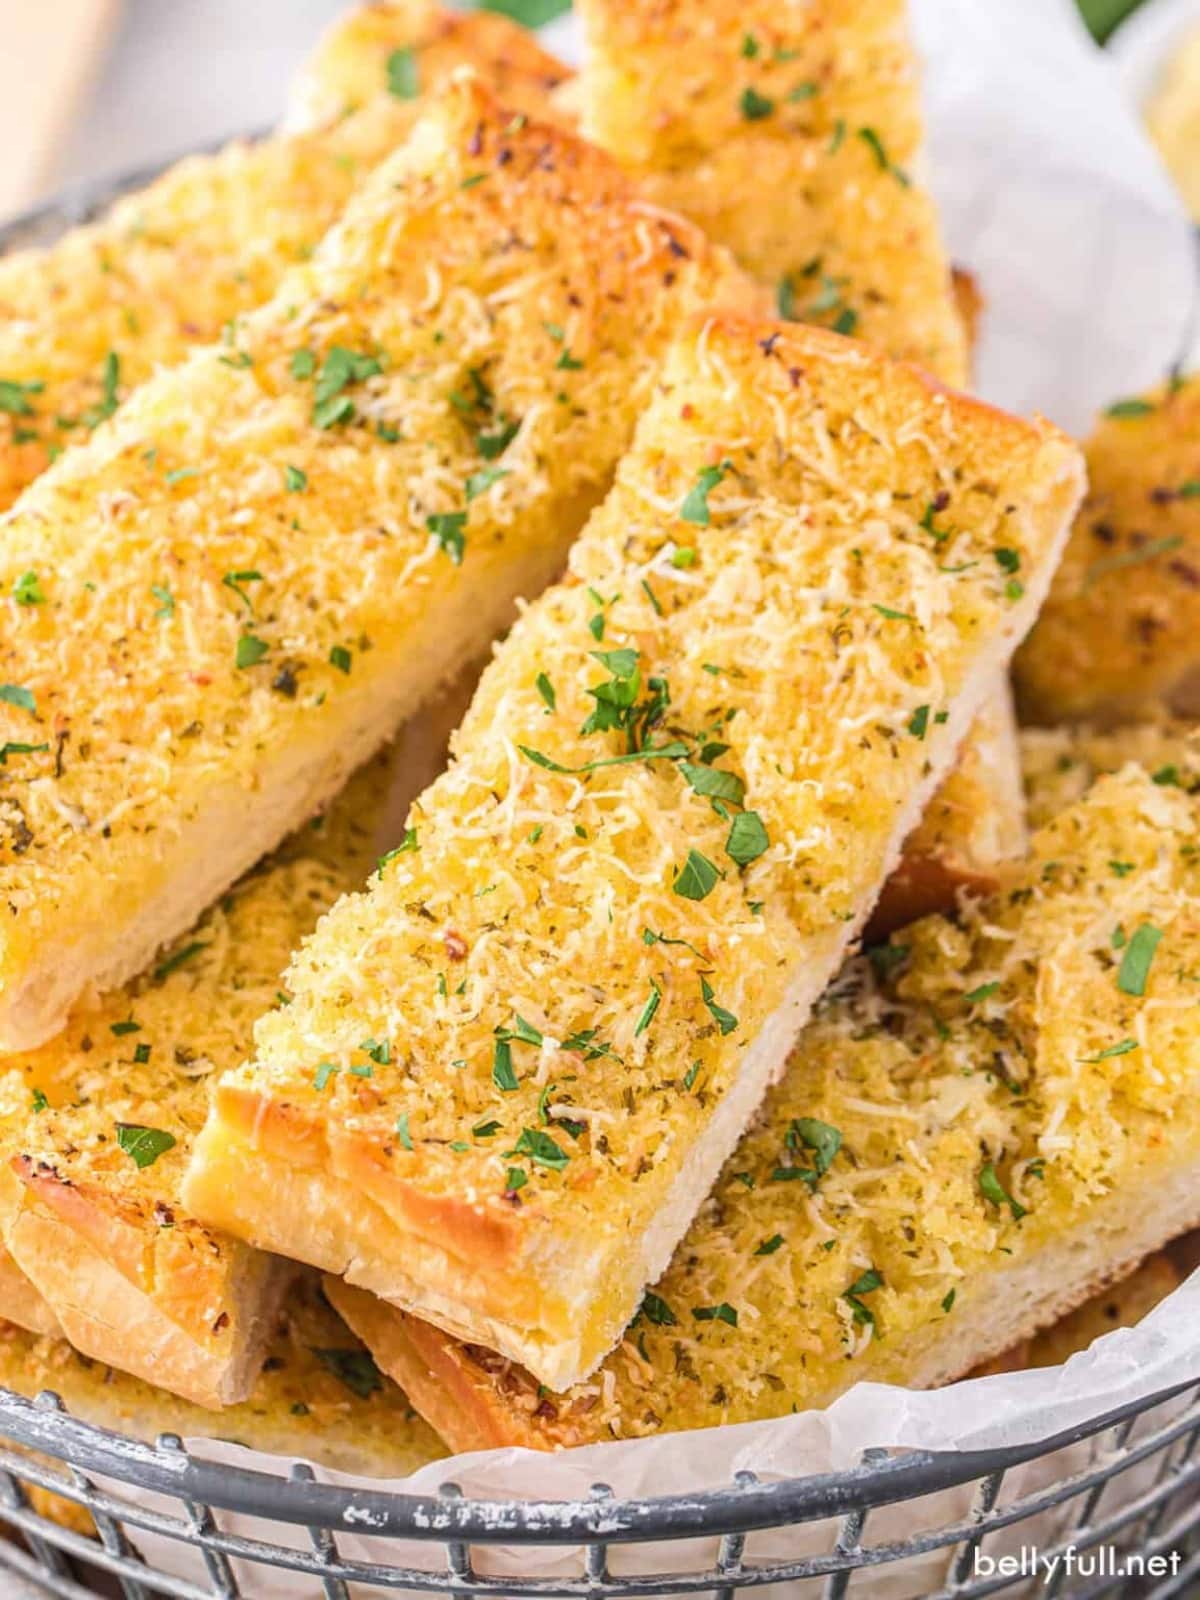 Cheesy bread sticks in a basket with parmesan cheese.